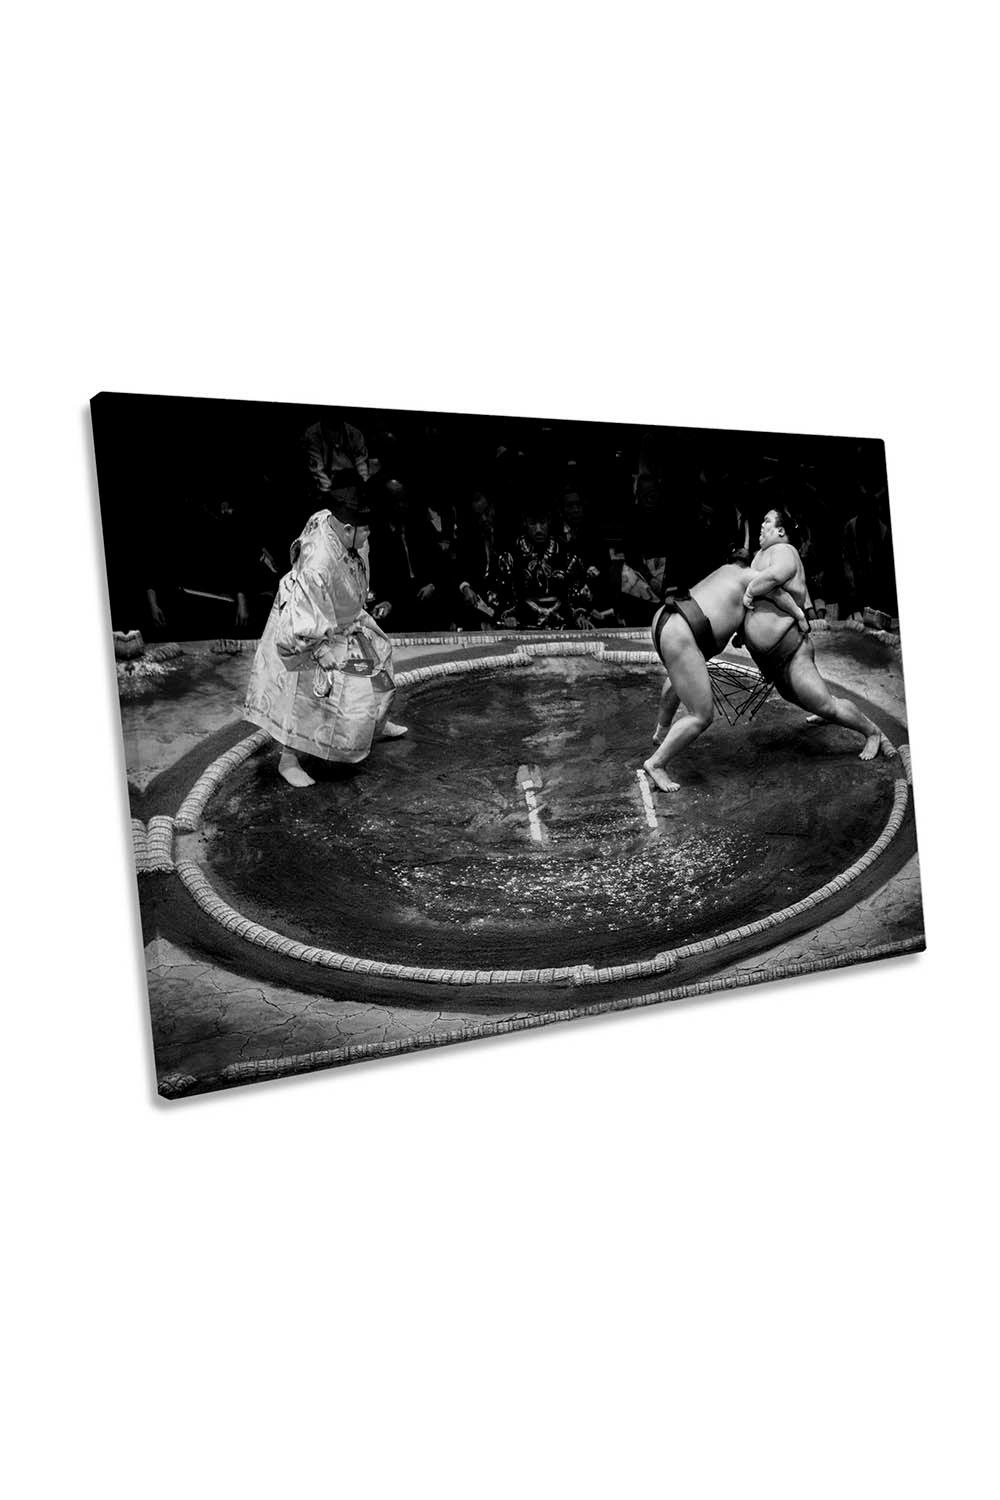 The Last Strength Sumo Wrestling Canvas Wall Art Picture Print